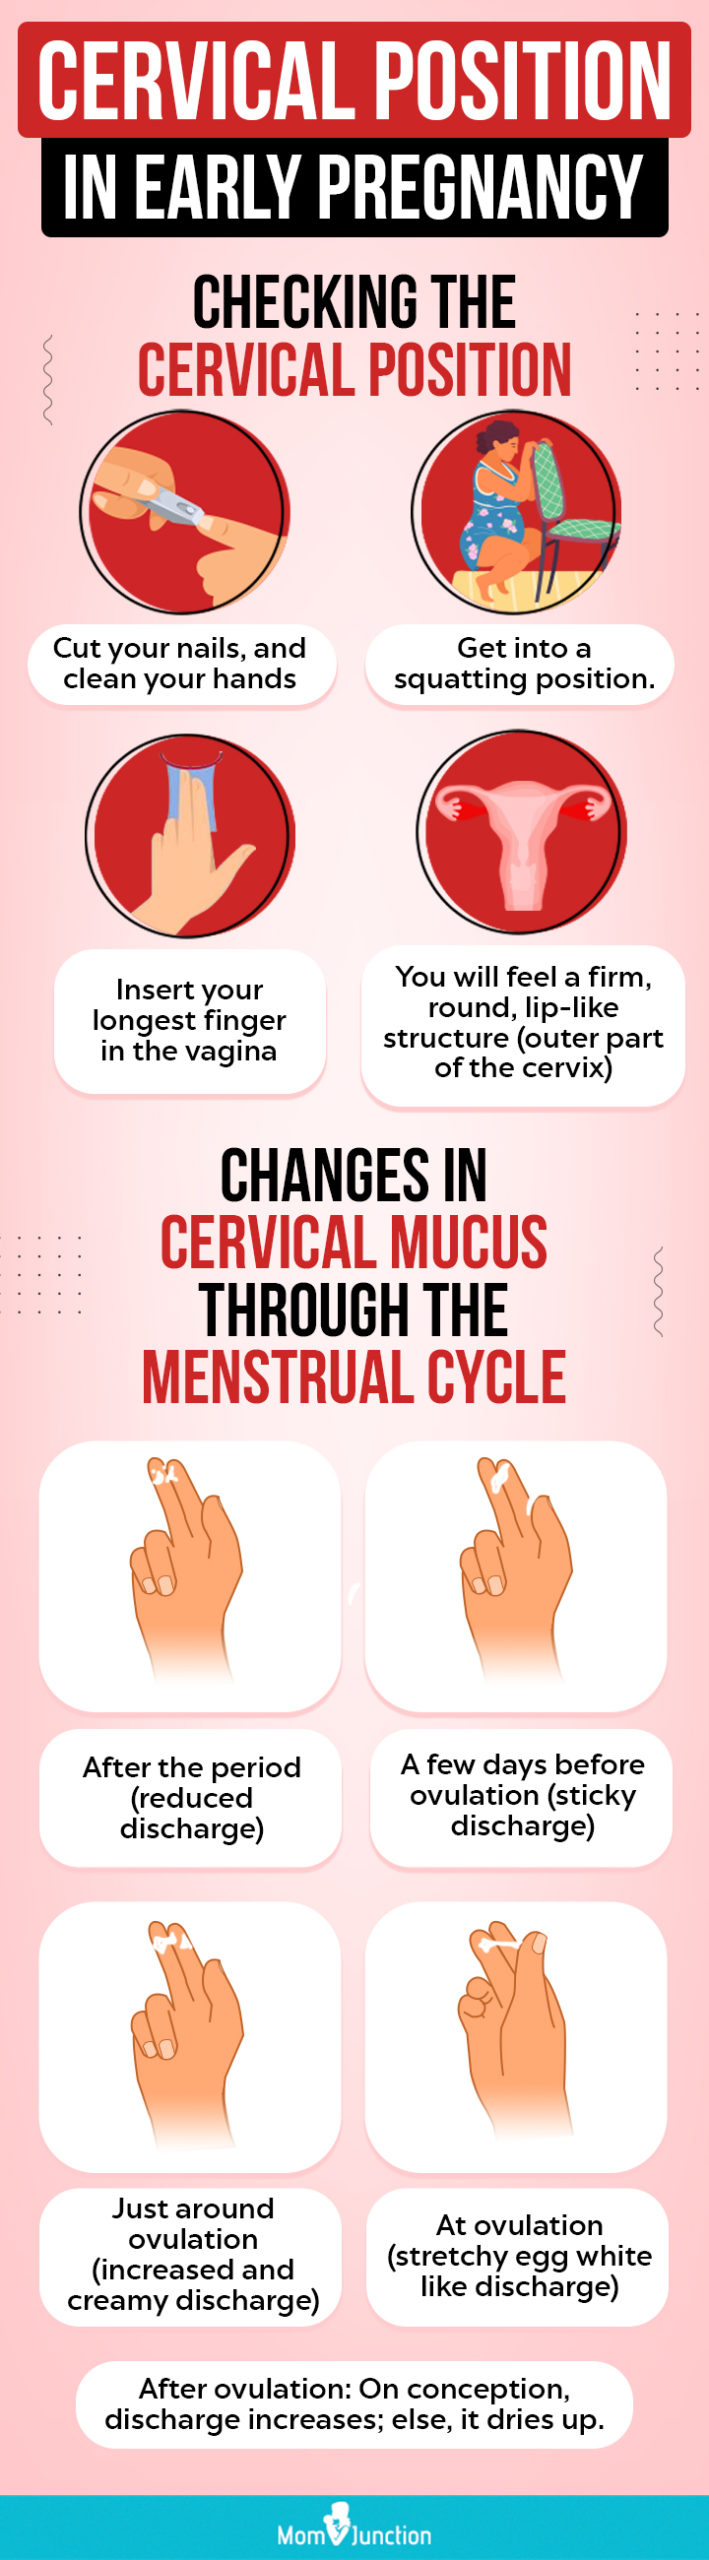 How to Check Your Cervix for Pregnancy